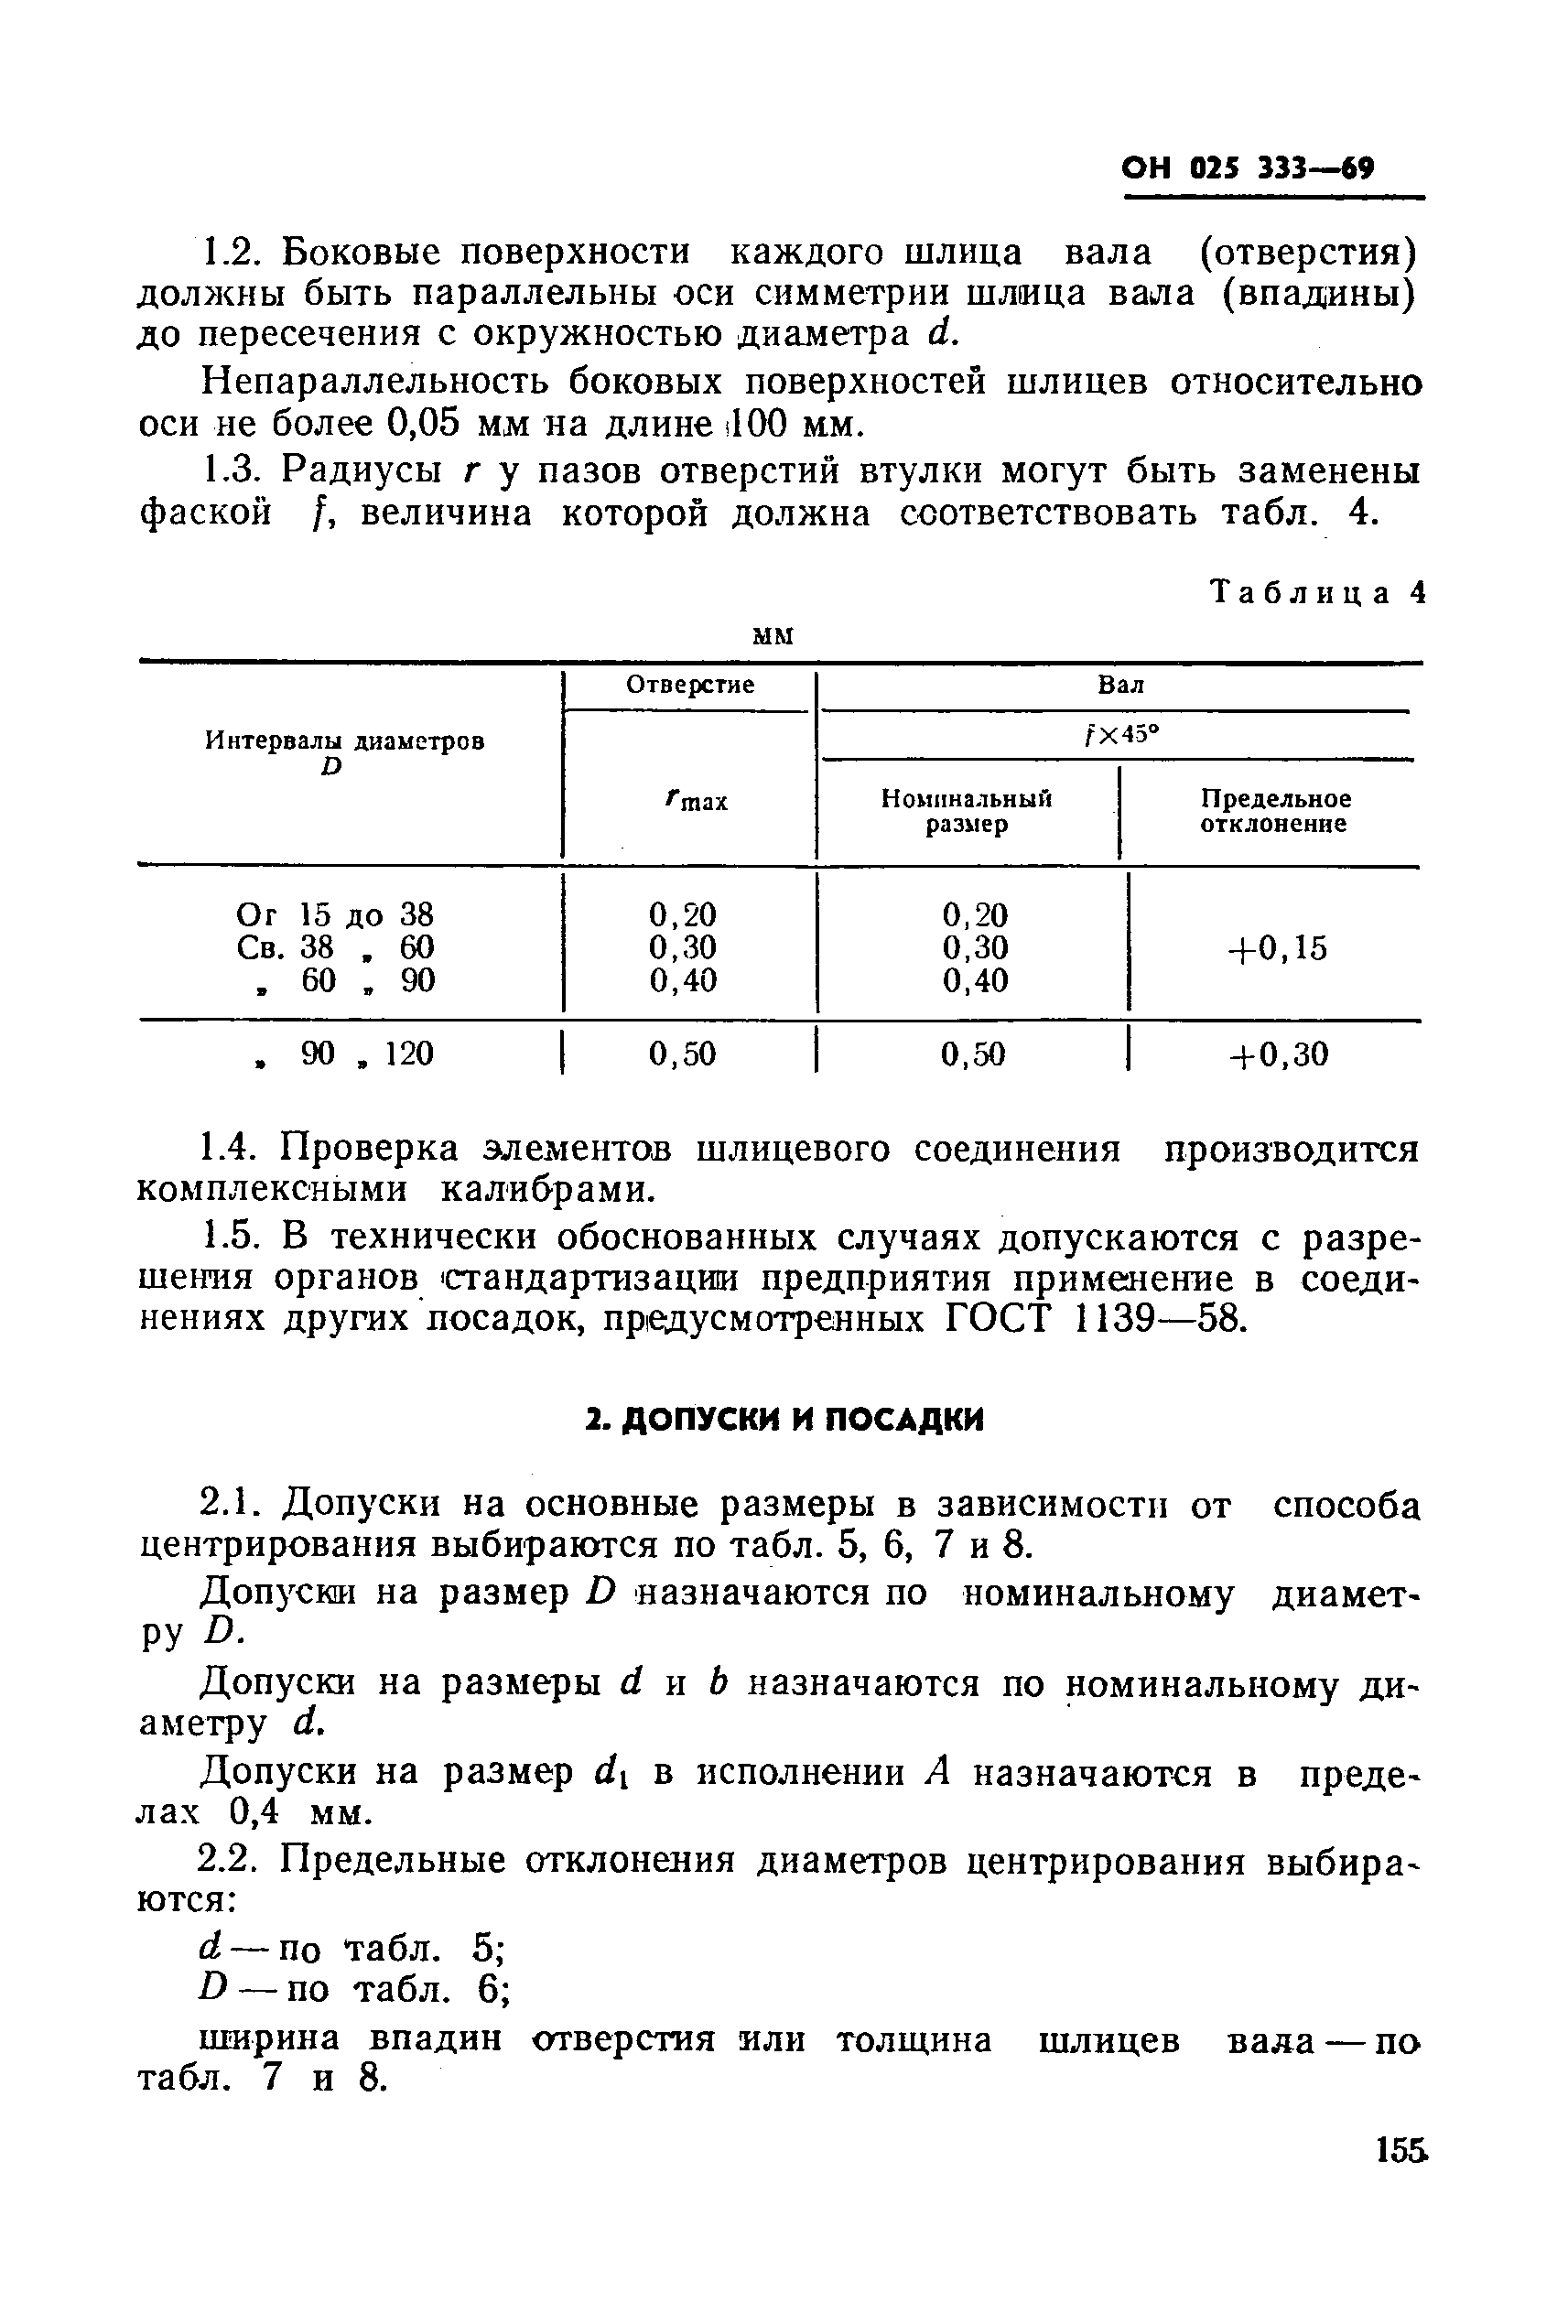 ОН 025 333-69